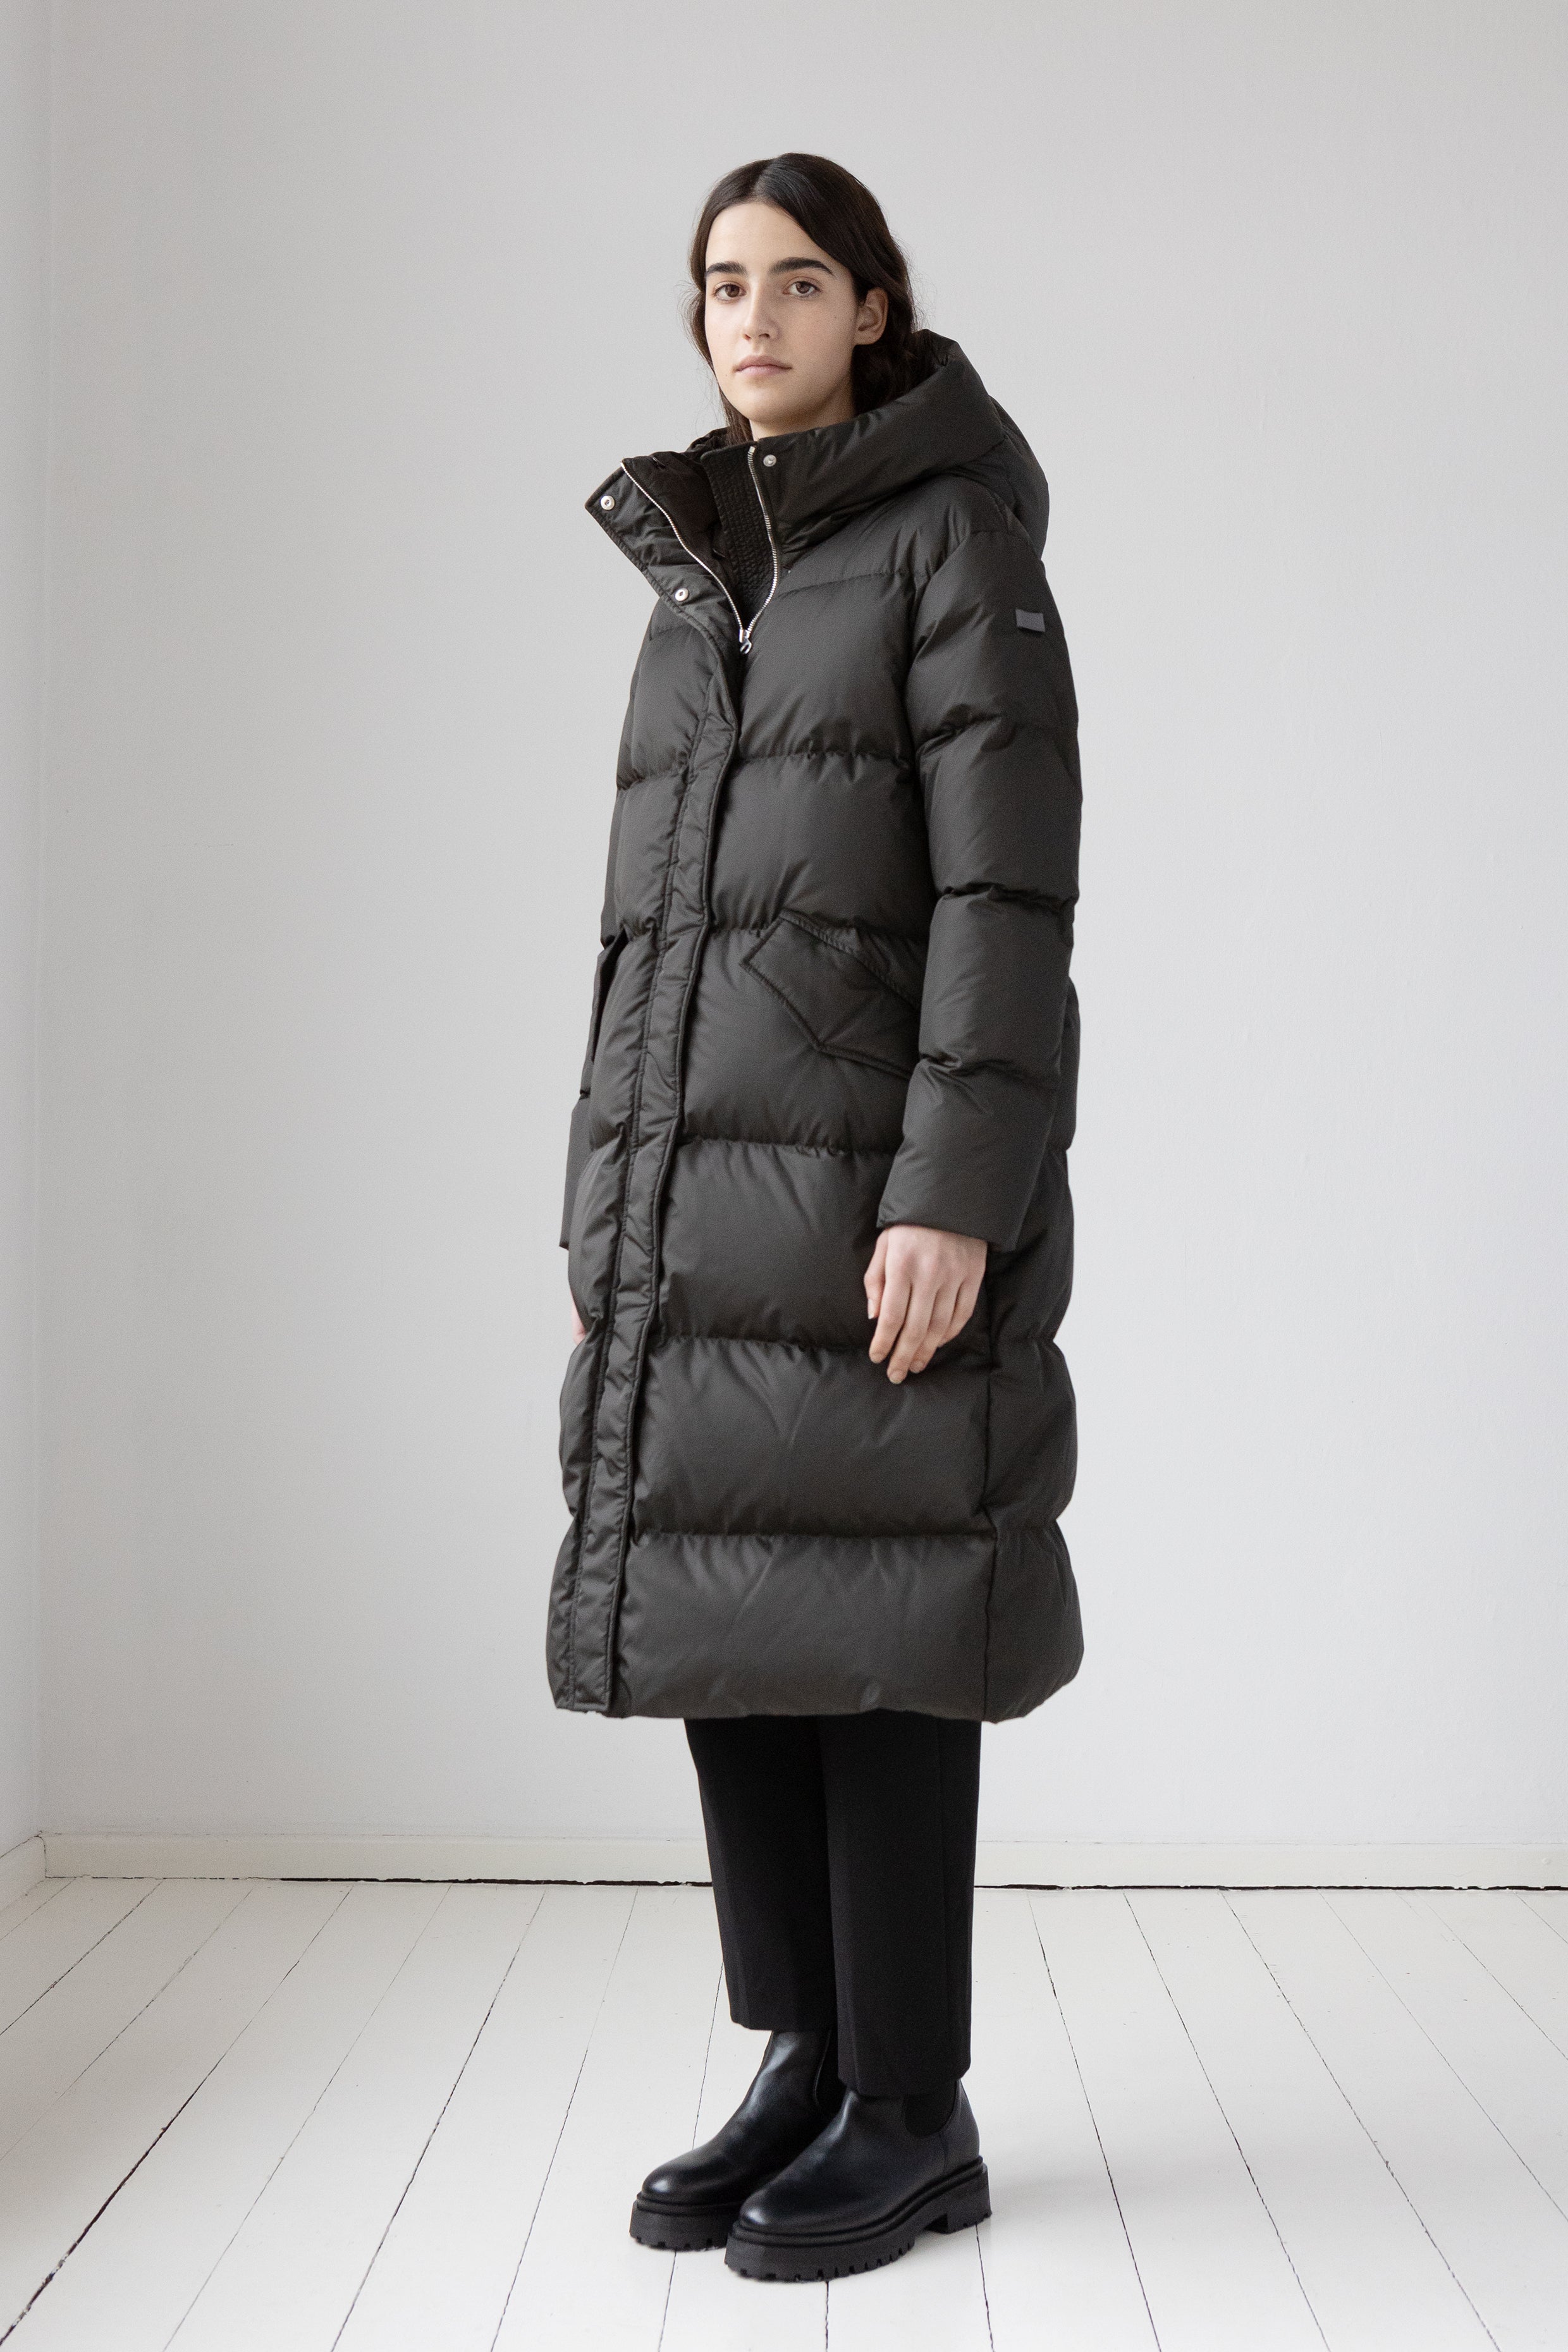 Long down coat in a dark color from the side